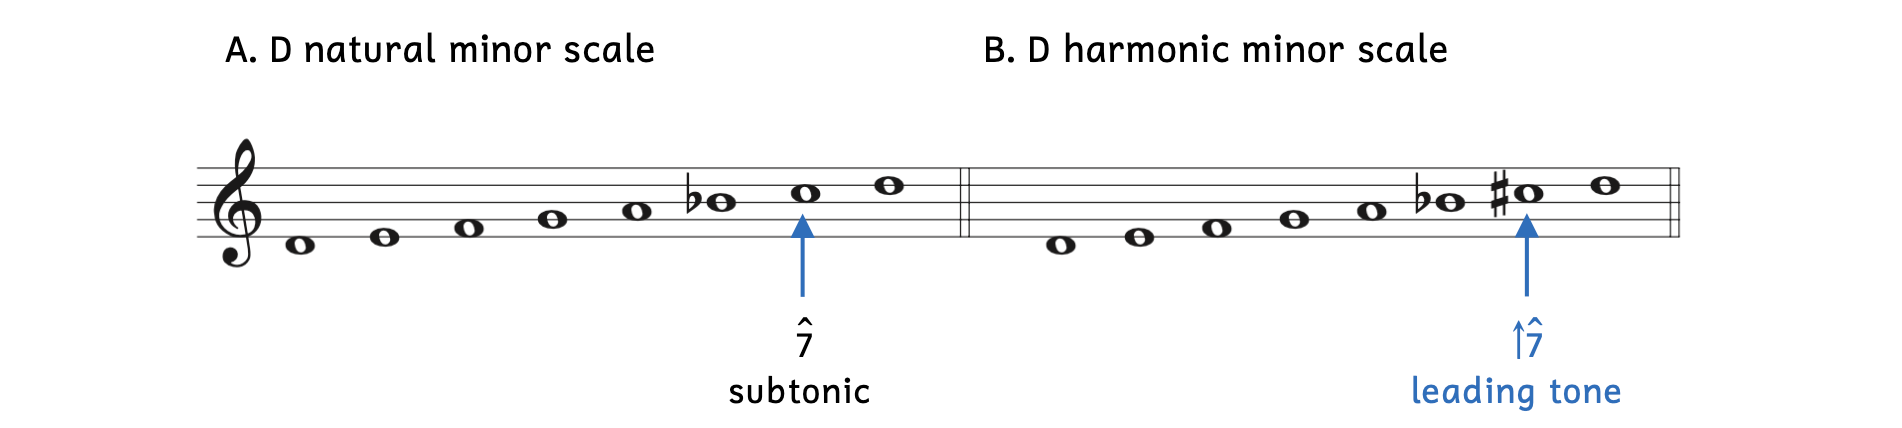 Example A shows the D natural minor scale where scale degree 7 is C, which is the subtonic. Example B shows the D harmonic minor scale where scale degree 7 is C-sharp, which is the leading tone.